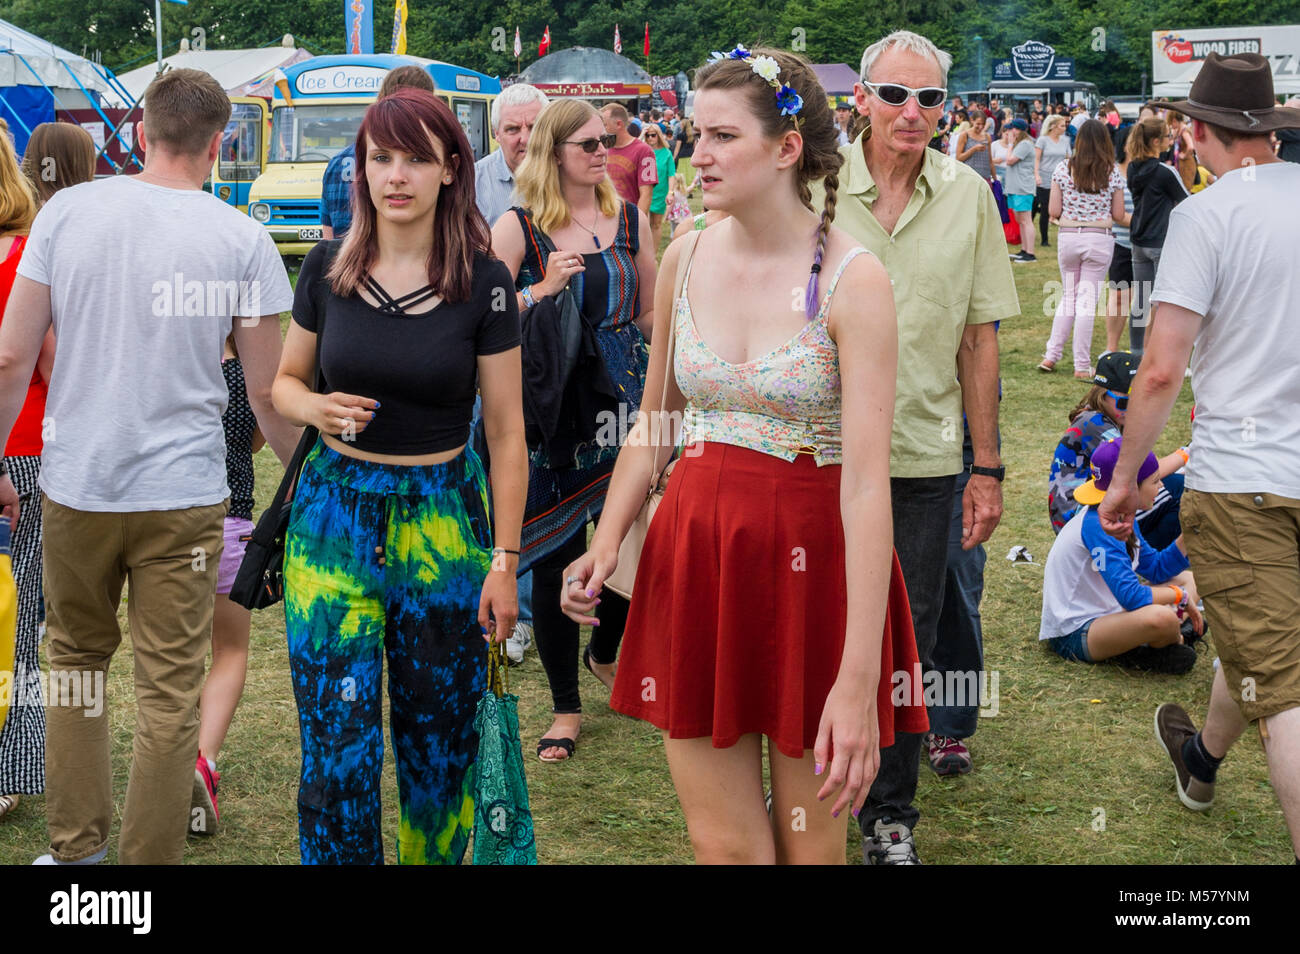 Crowd of festival goers/people at Coventry Godiva Live Music Festival, Coventry, UK in July 2017. Stock Photo